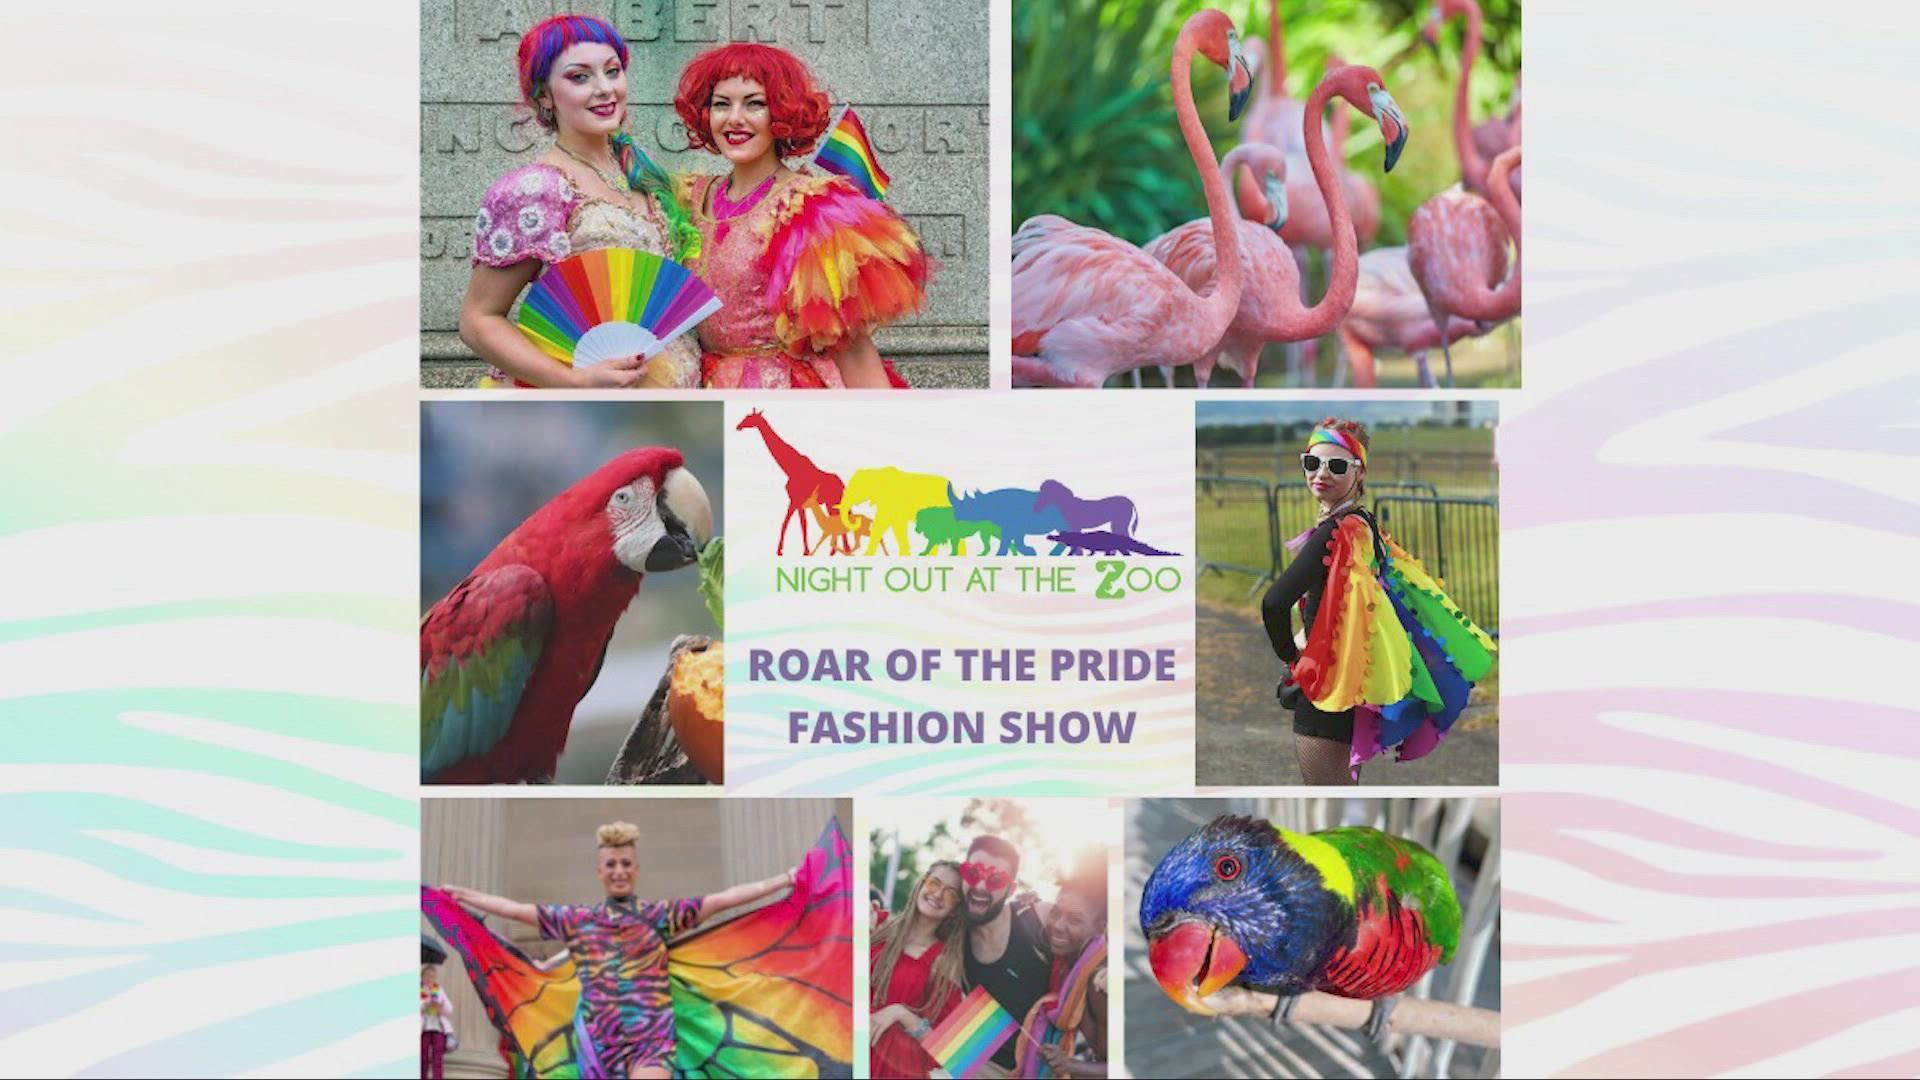 The family-friendly event will feature a night pride parade.